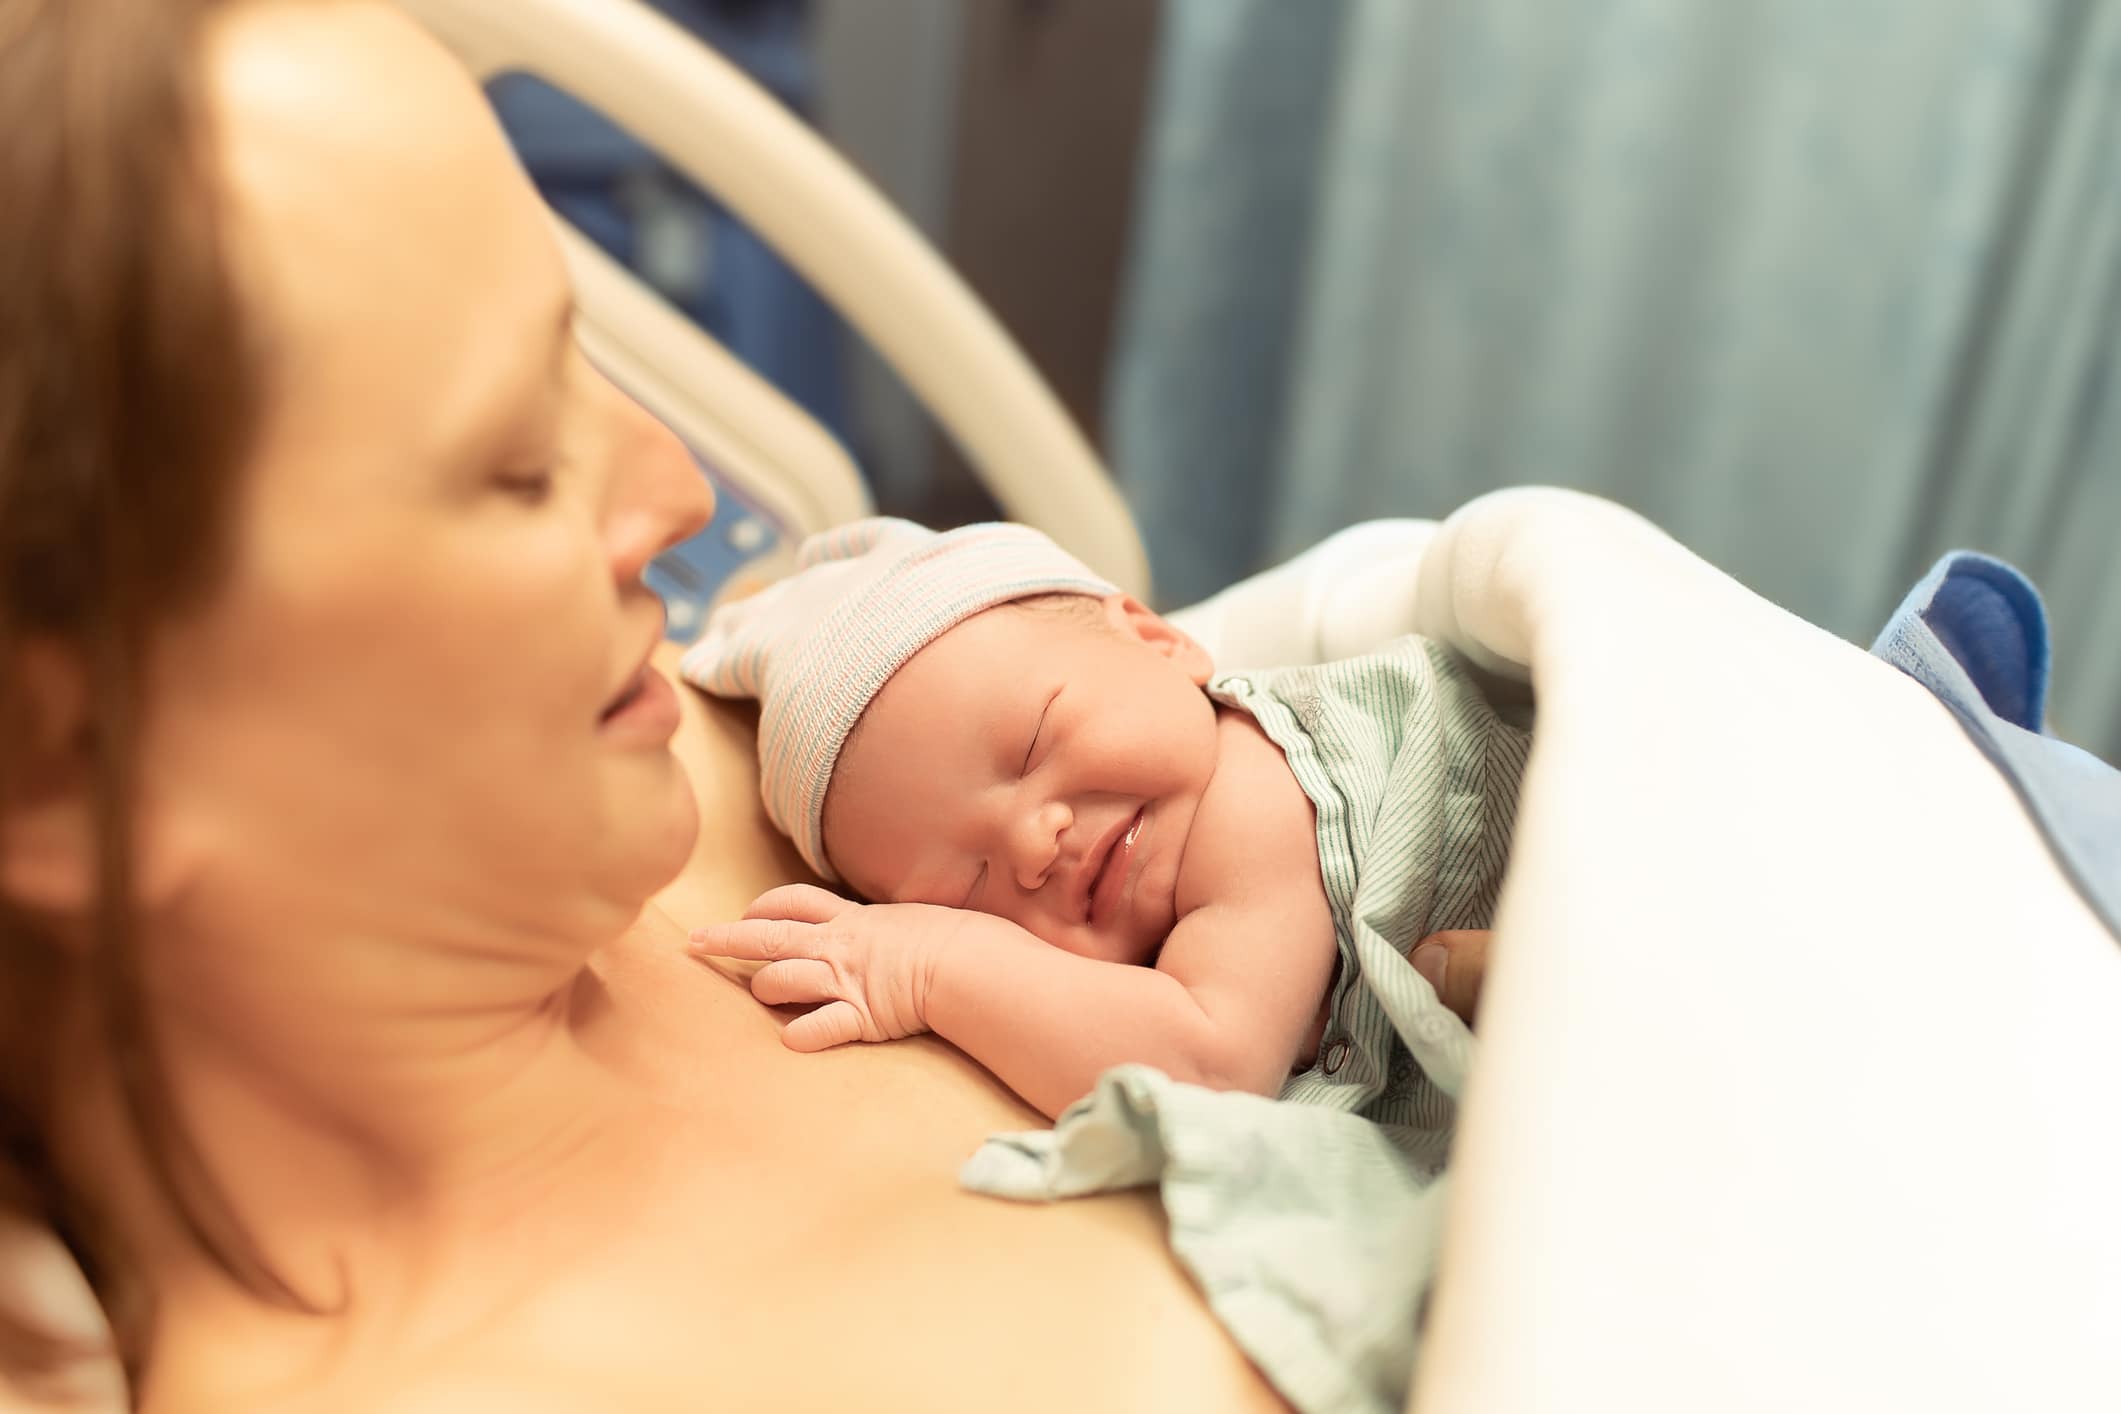 25 Birth Affirmations To Help You Through Your Labor